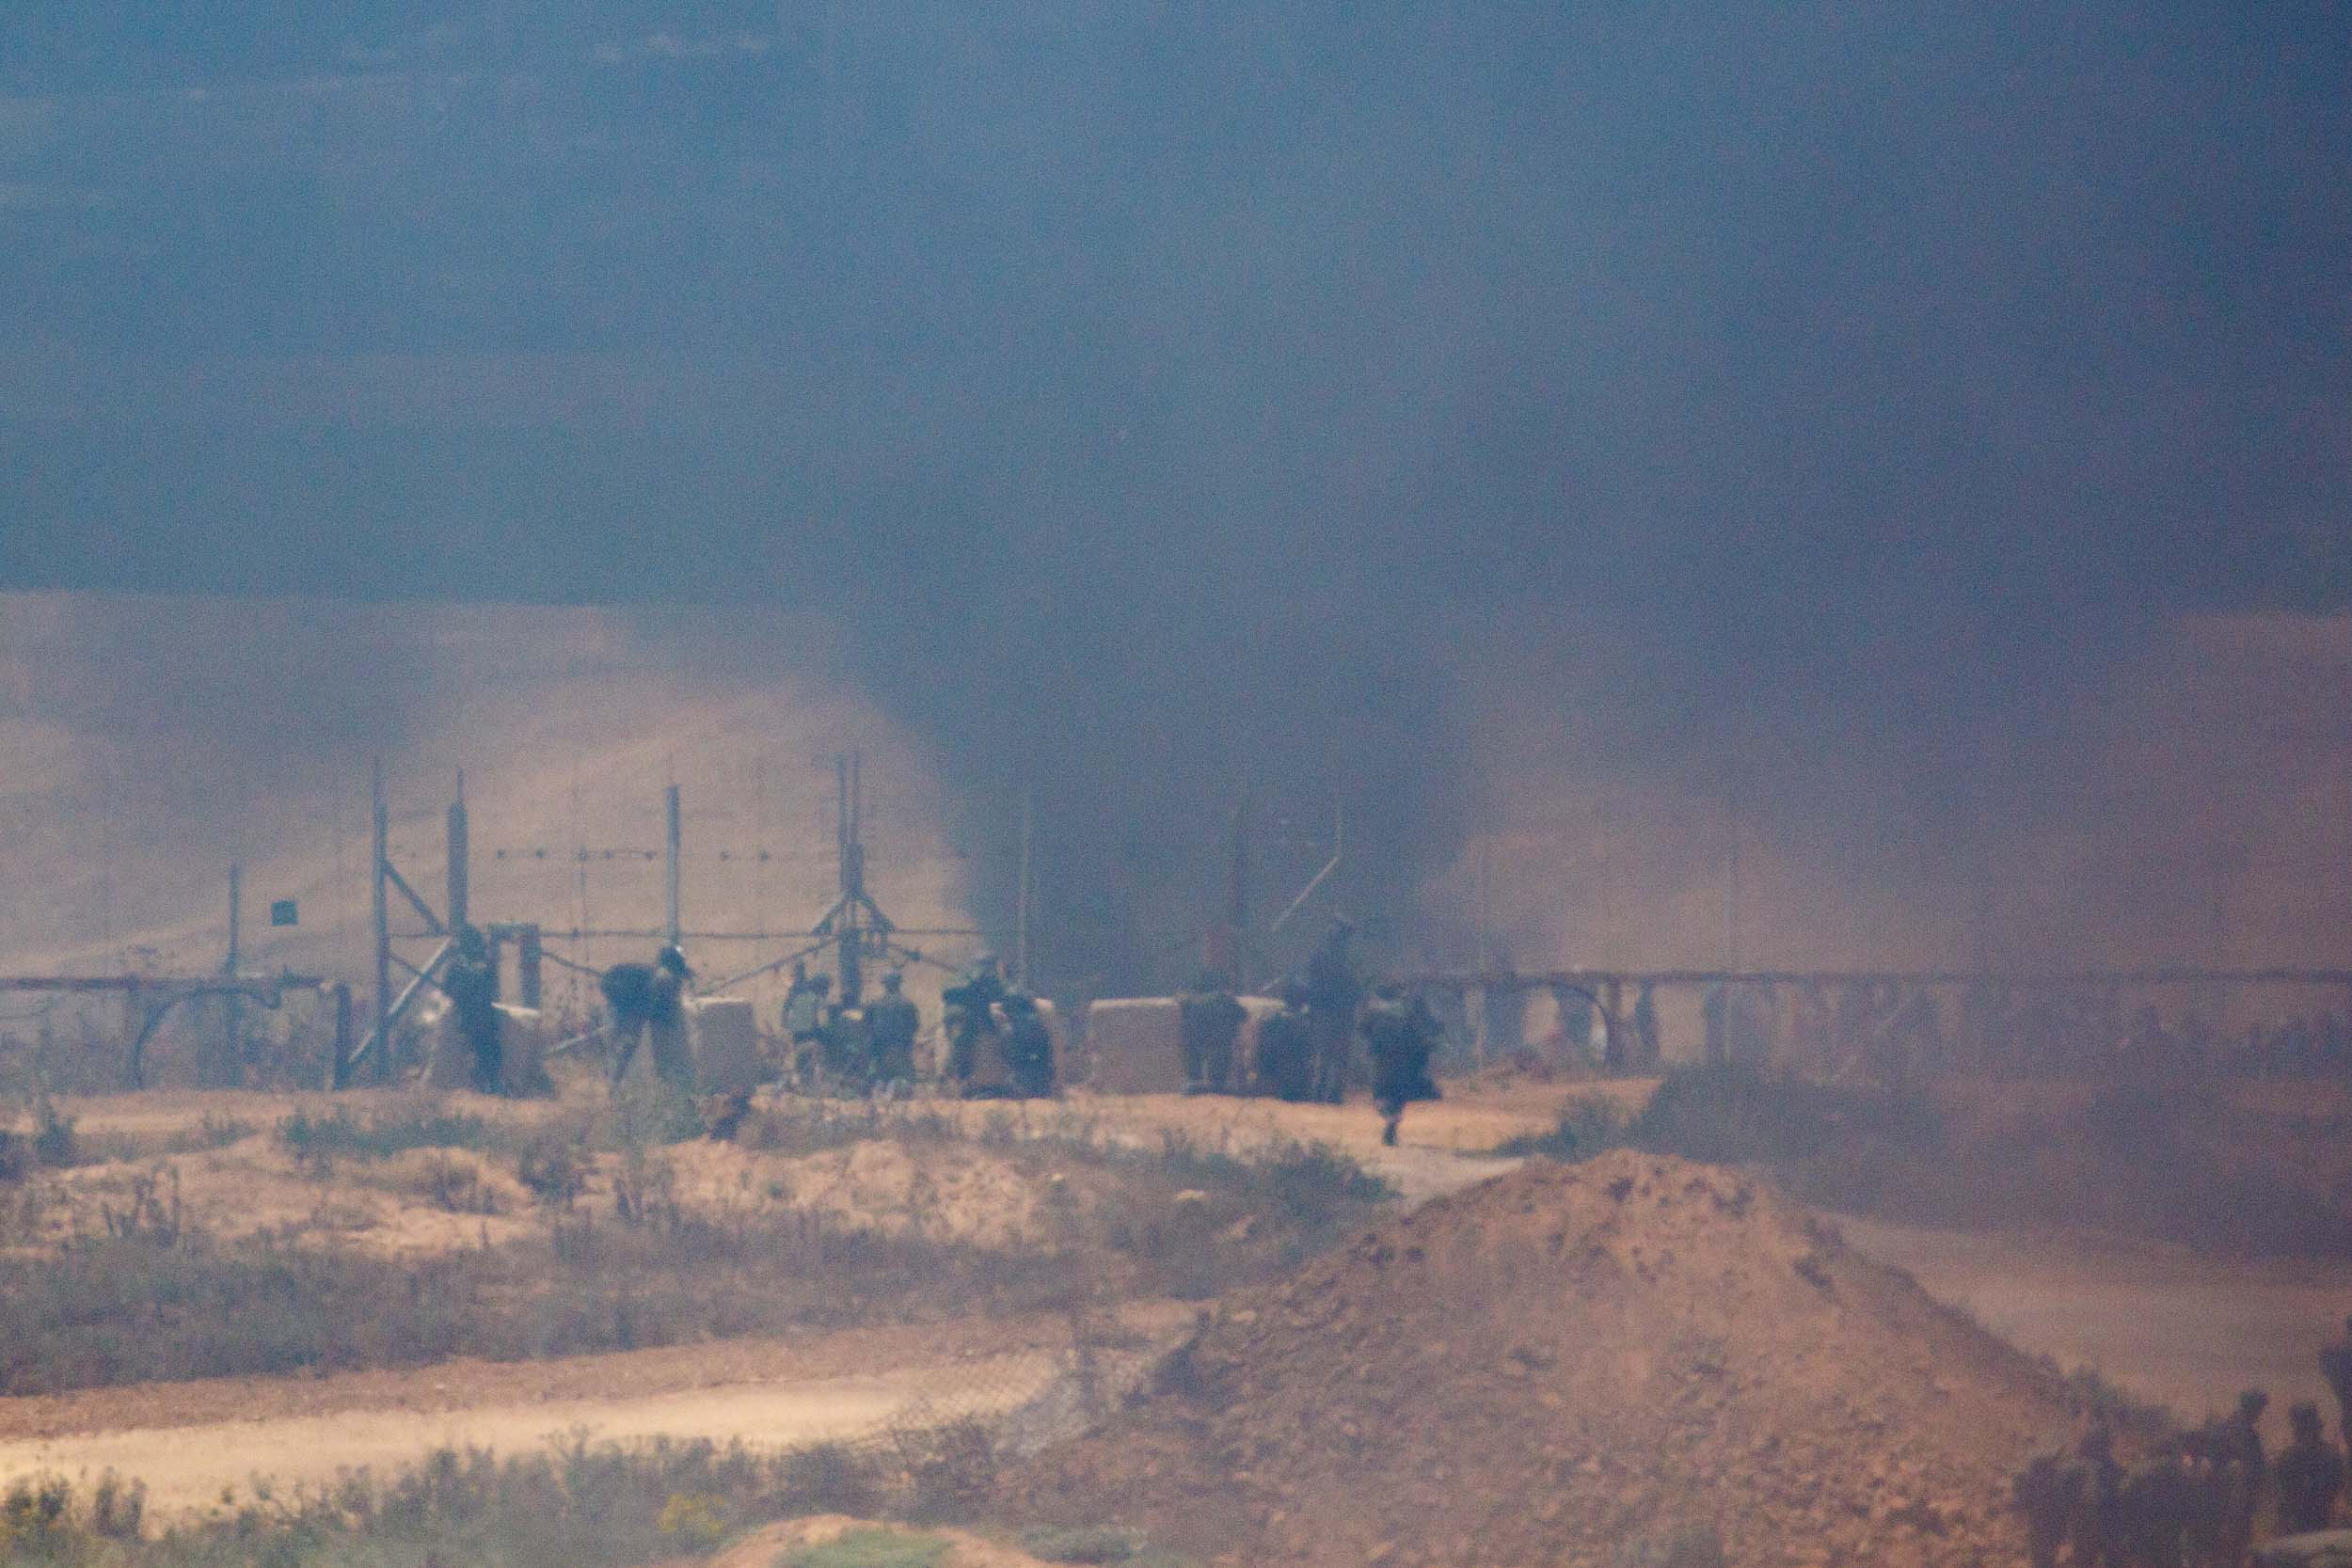 Northern Gaza Border, May 2018 - Clashes between IDF and Gaza peoples trying to forcefully cross the Israeli border